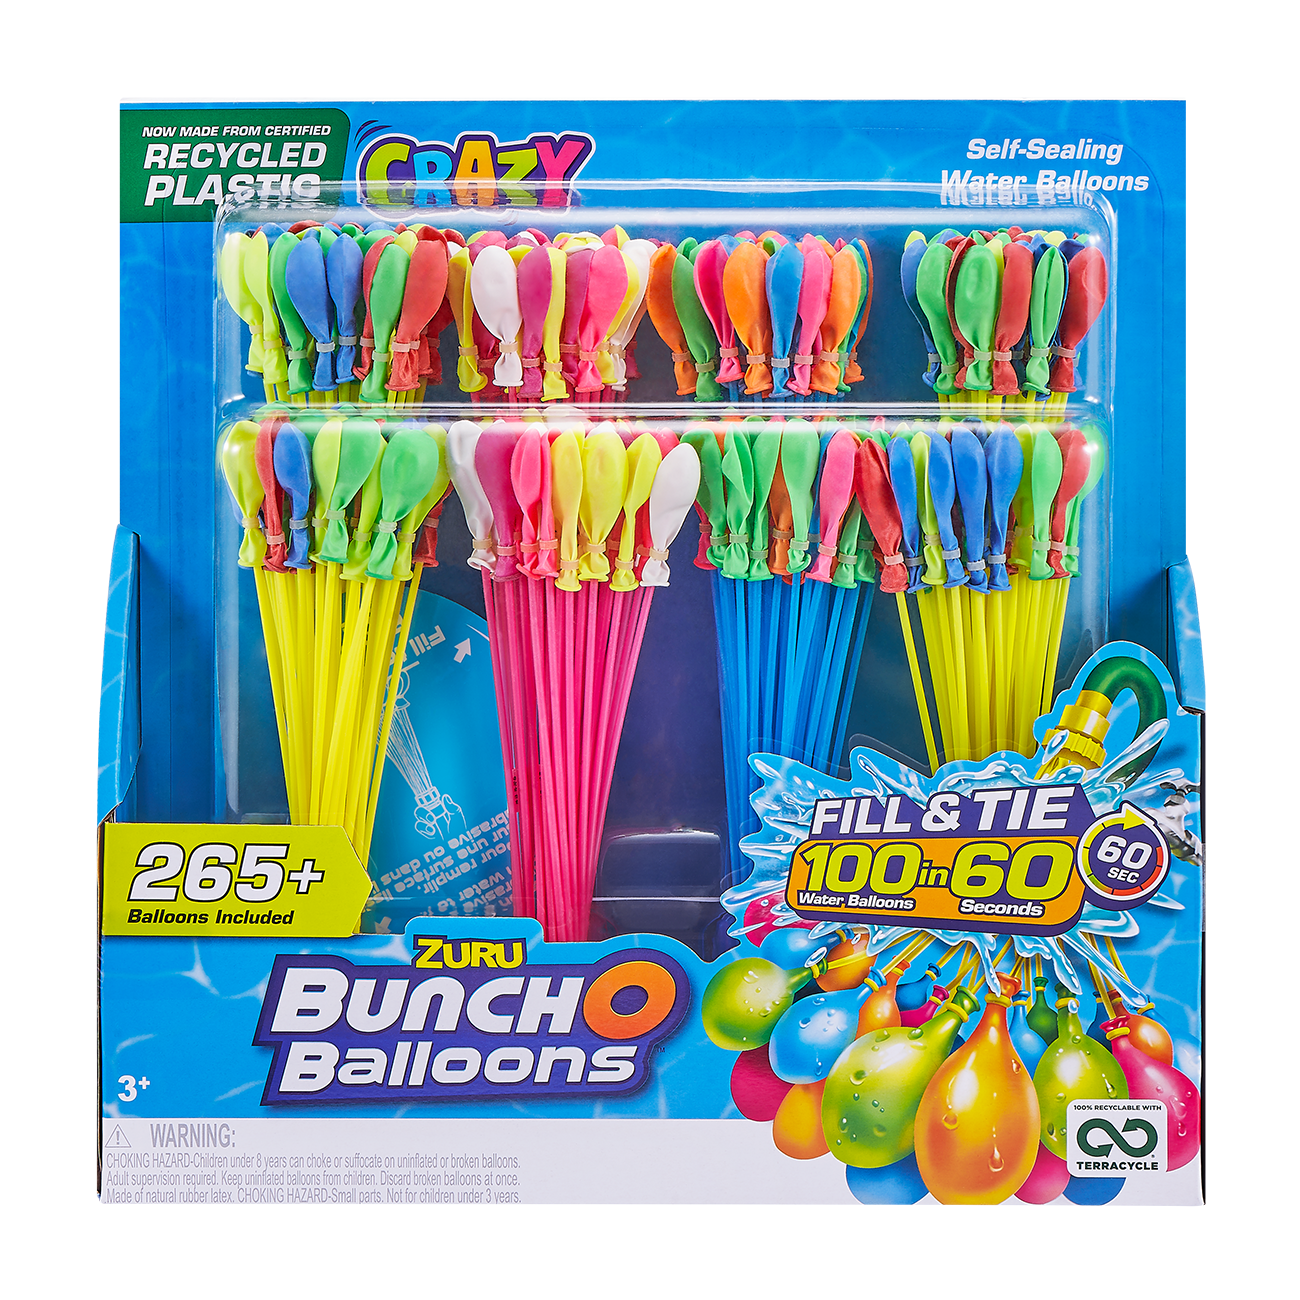 Bunch o Balloons 100 Water Balloons with Balloon Launcher Zuru Red White & Blue 